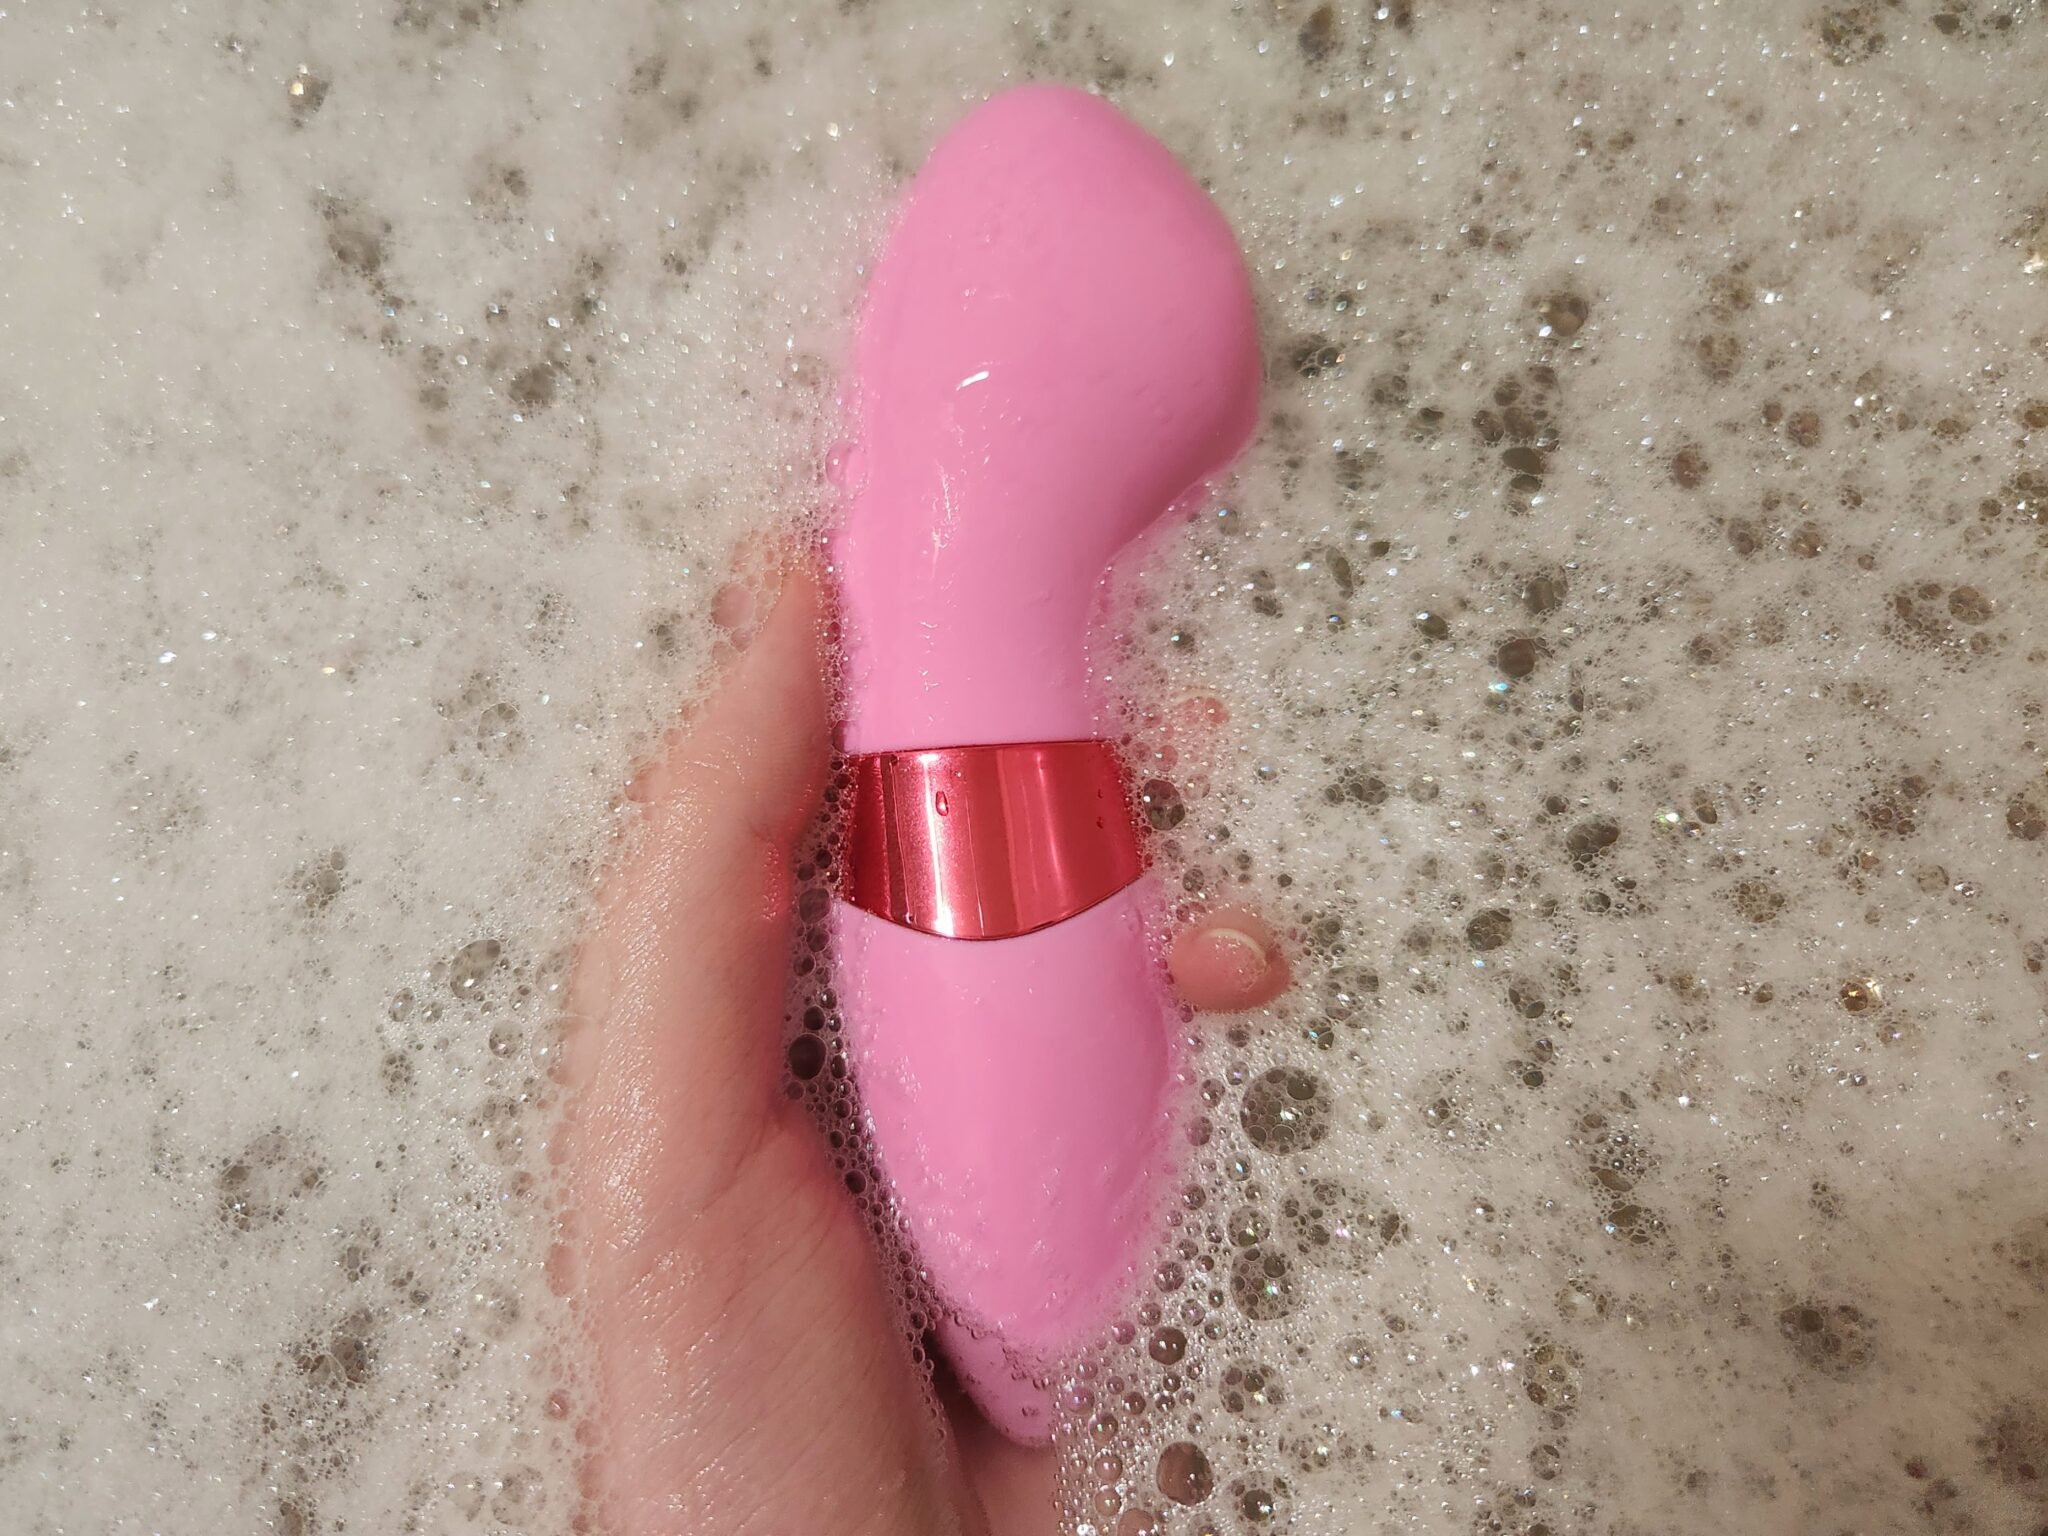 My Personal Experiences with Satisfyer Breathless